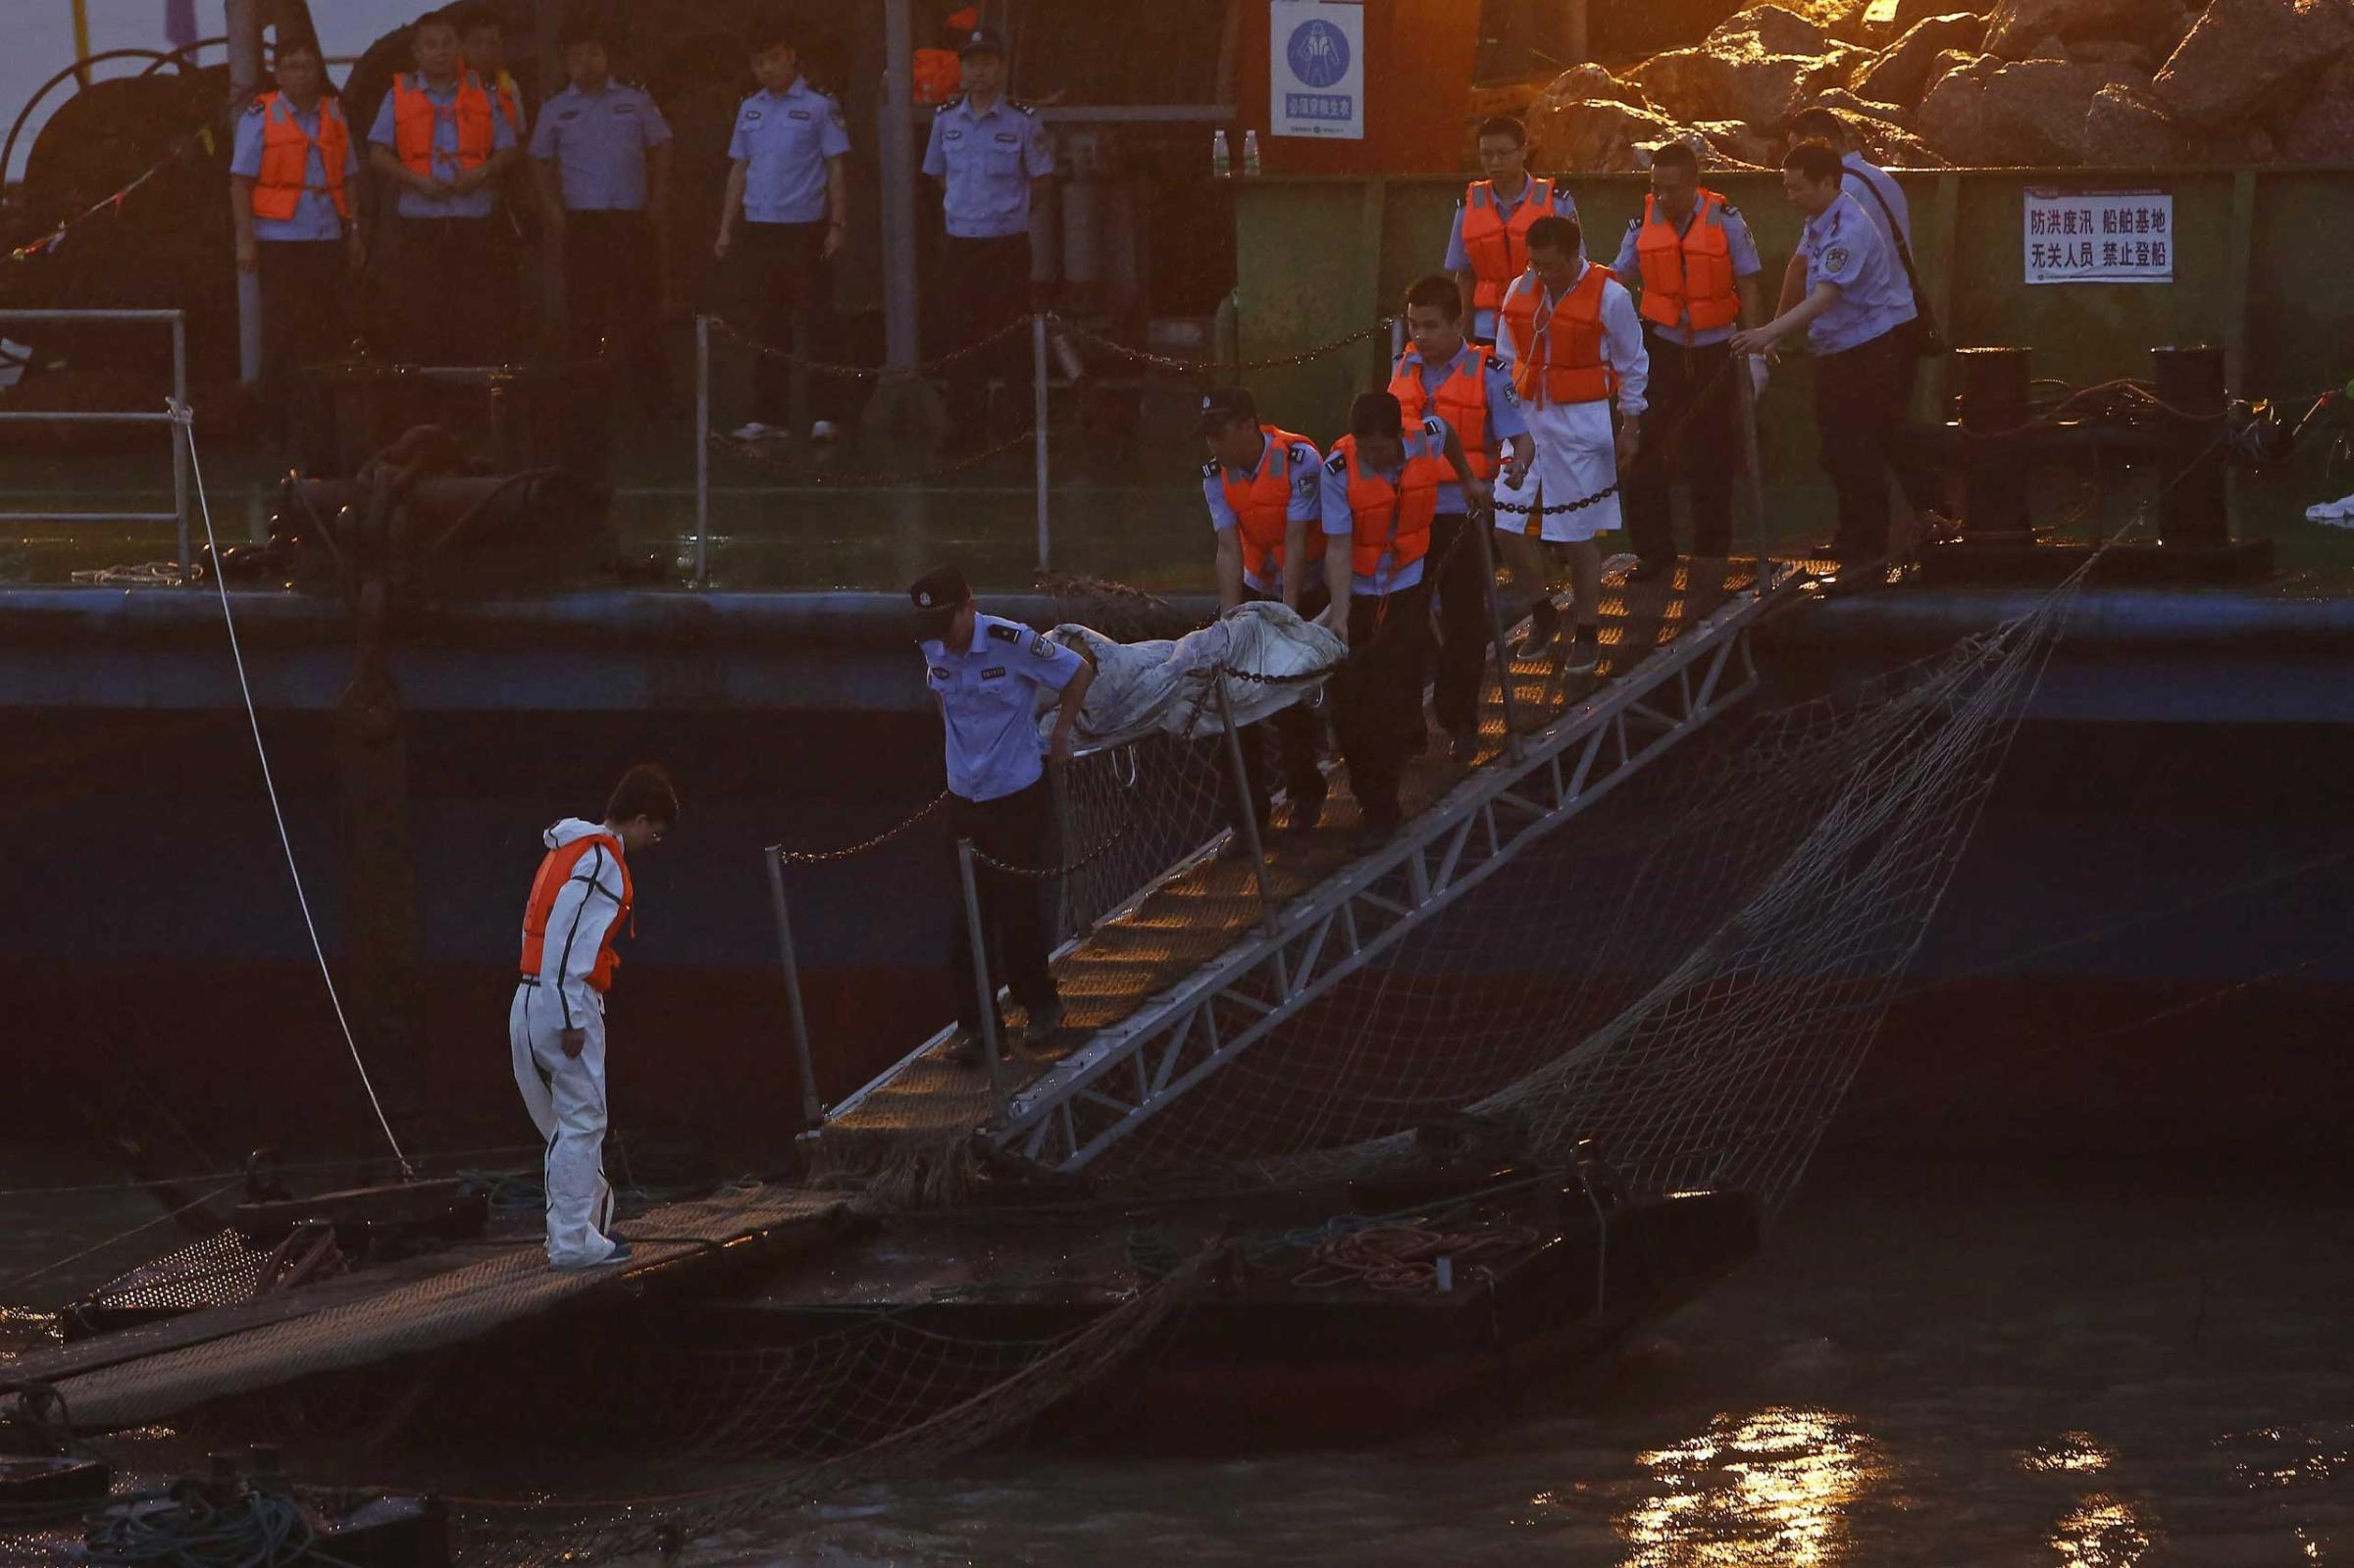 Rescue workers carry a body from the sunken ship in the Jianli section of Yangtze River, Hubei province, China on June 2, 2015.